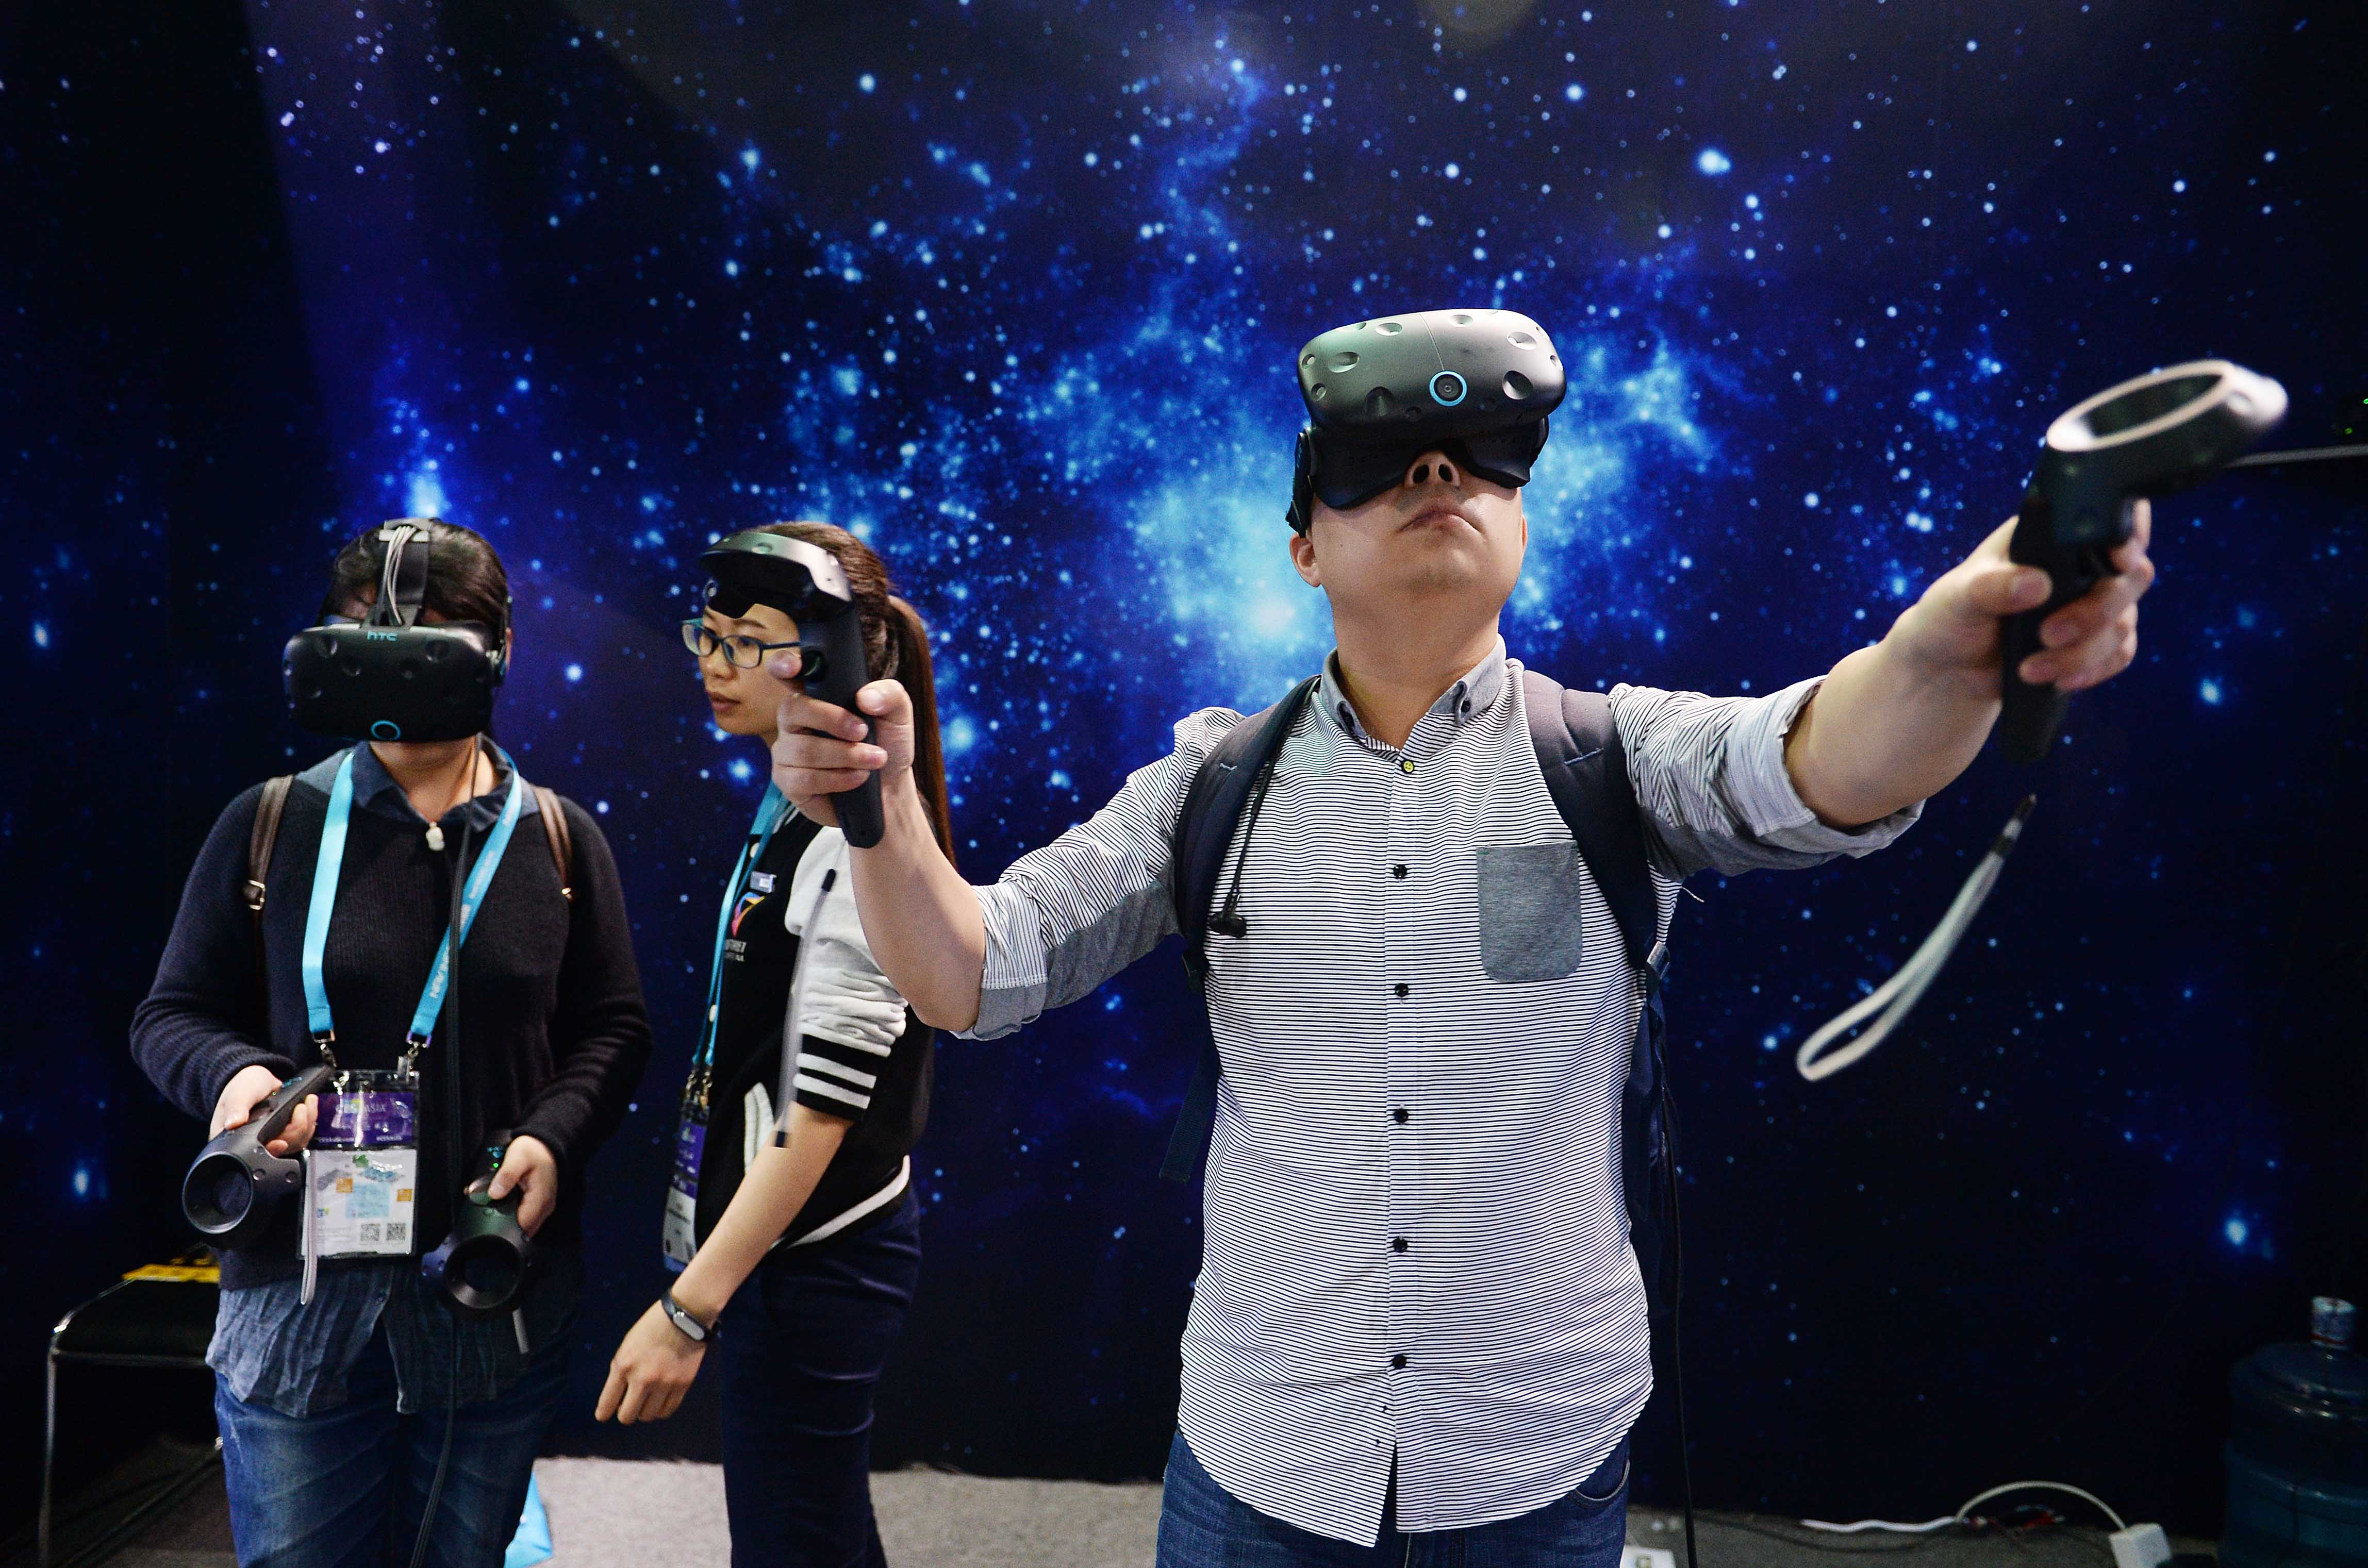 Visitors experience VR (virtual reality) devices during the CES Asia 2016 on May 11, 2016 in Shanghai, China. (VCG&mdash;VCG via Getty Images)